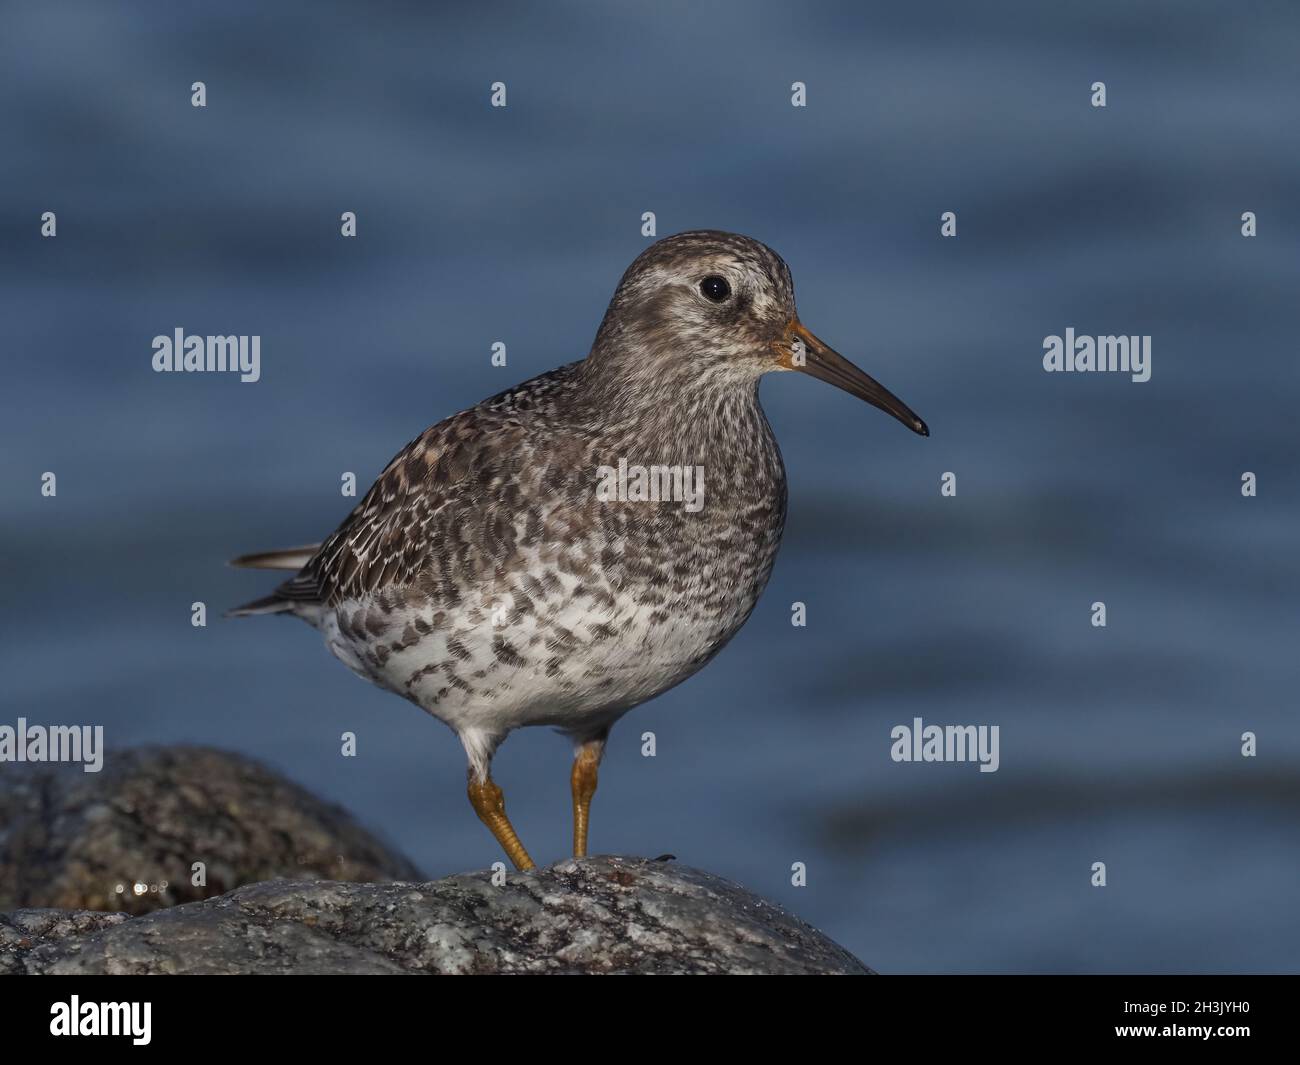 purple sandpipers may be confiding birds if you settle within a rocky shore, especially with an incoming tide pushing the birds towards you. Stock Photo